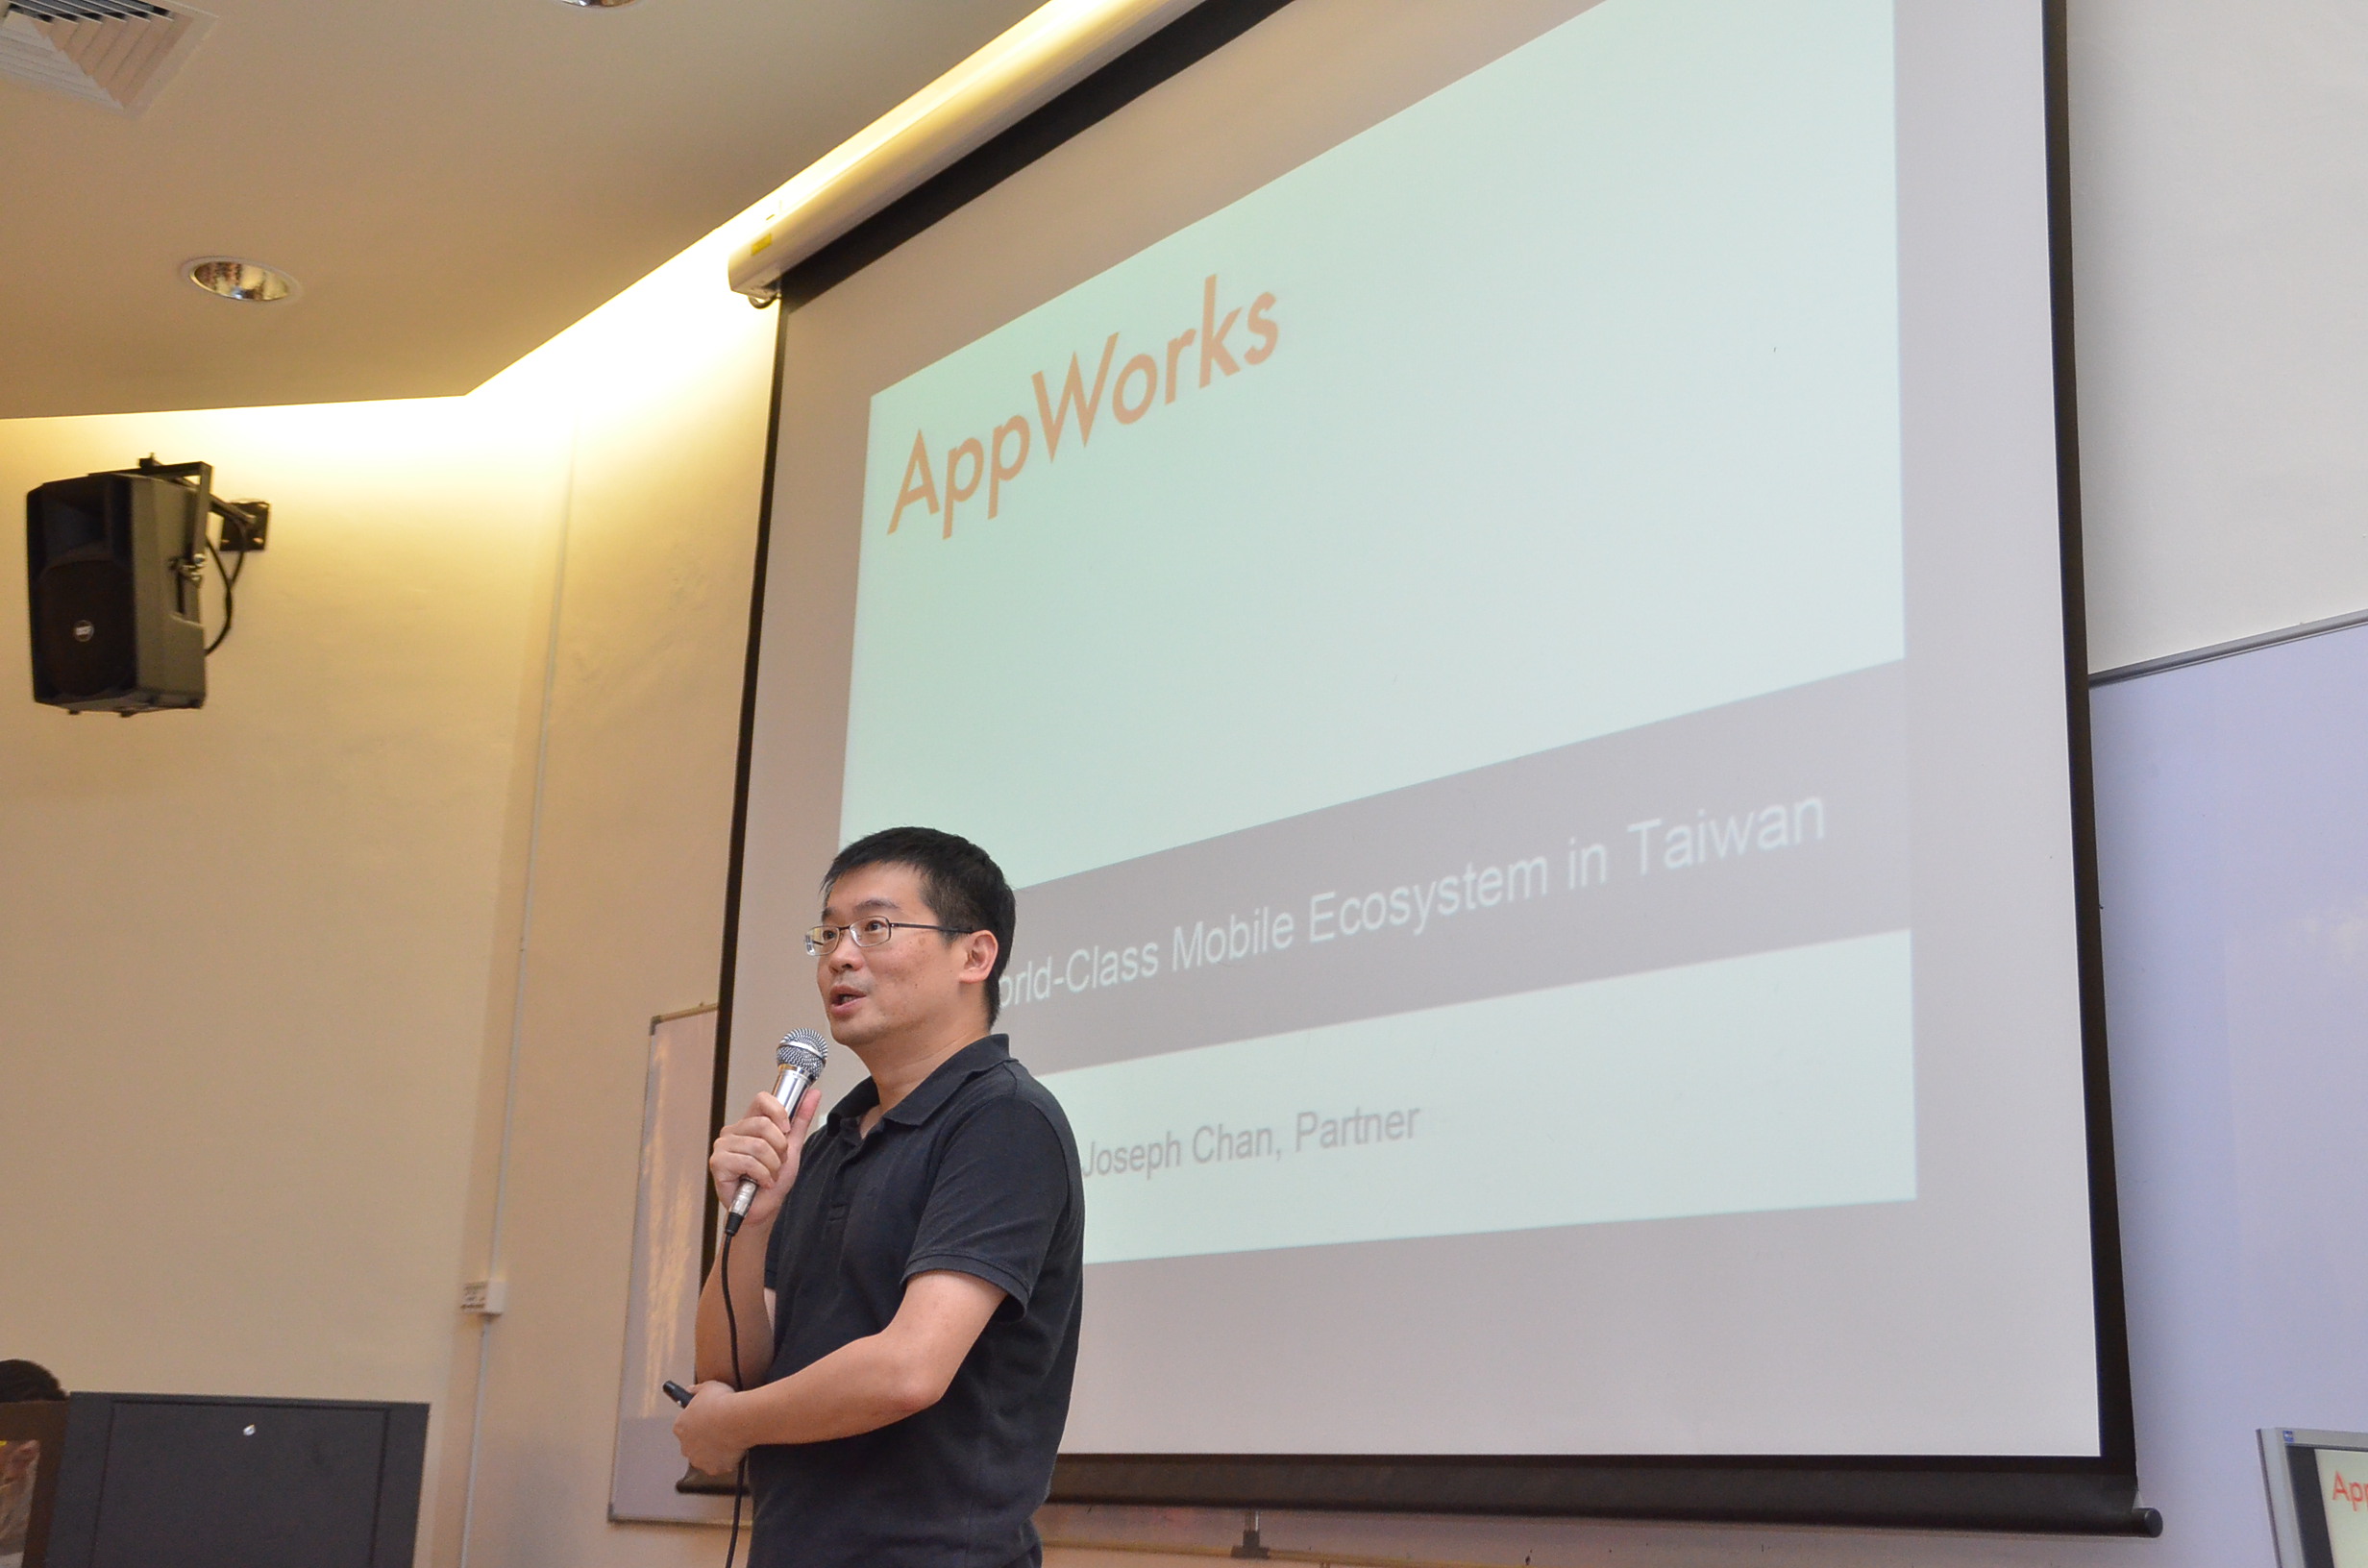 Chan outlining AppWorks services and the paradigm shift to mobile era